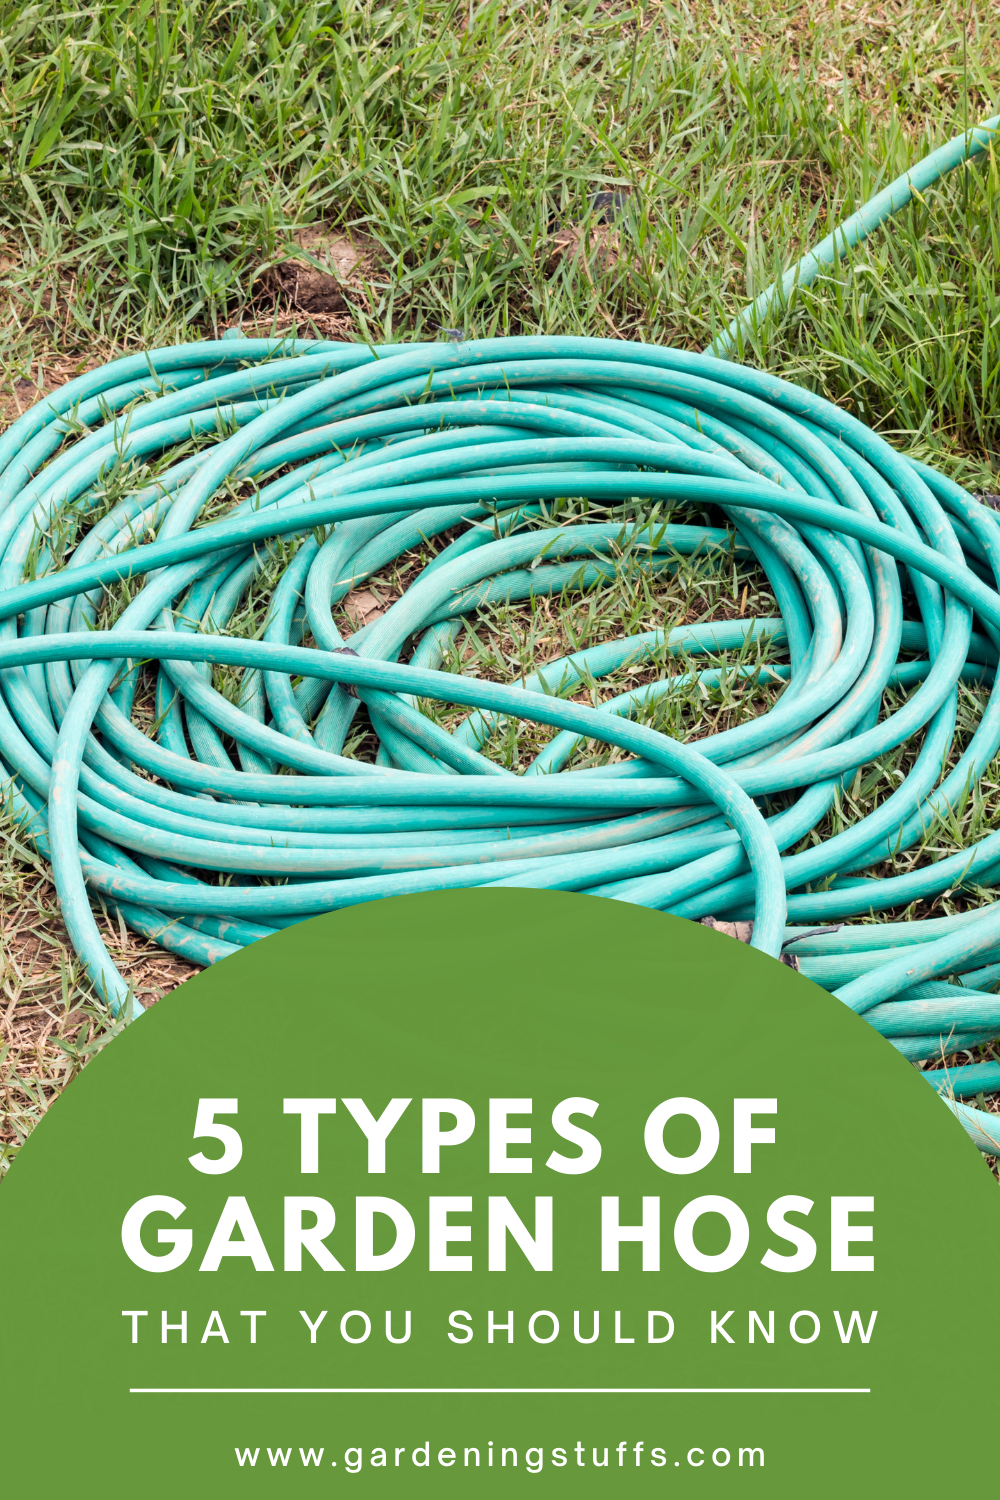 There are different types of garden hose. There are flexible hoses, expandable garden hoses, coil garden hoses, and garden hoses that are safe for drinking water use.